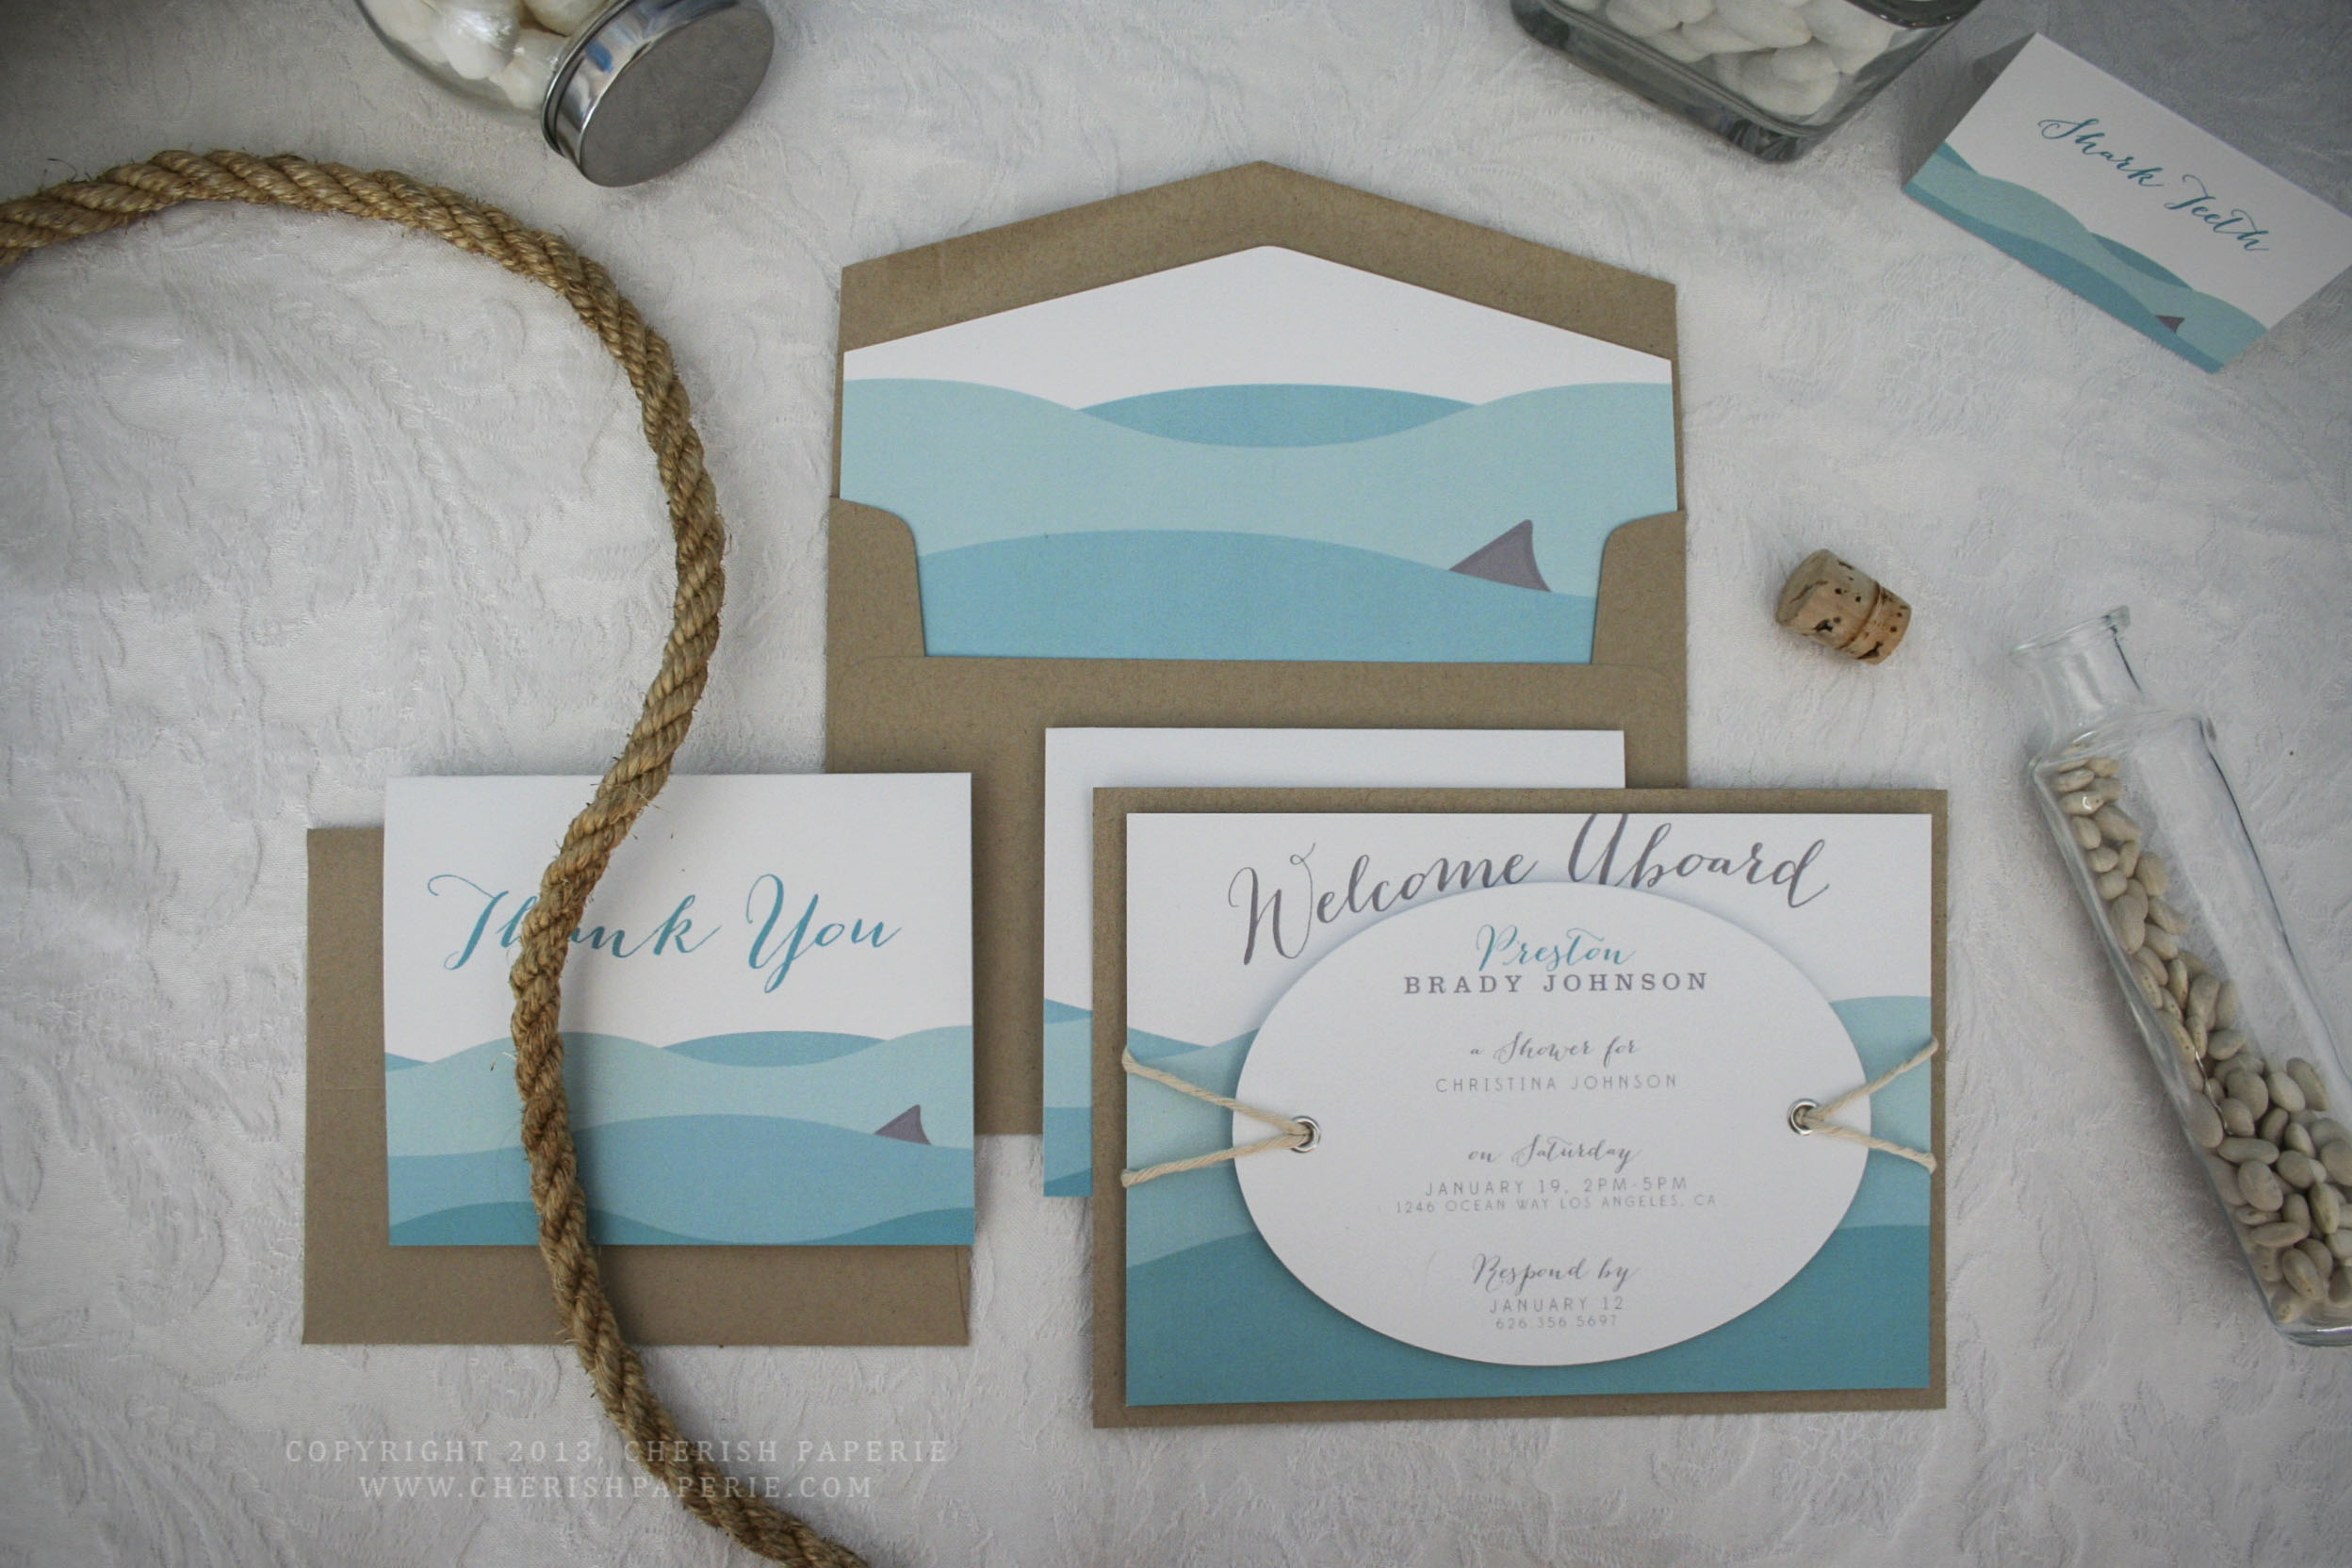 Baby Shower; Cherish Paperie; Ships Ahoy; Nautical shower; boys baby shower; shark-themed shower; blue and grey; blue events; grey events; grey wedding inspiration